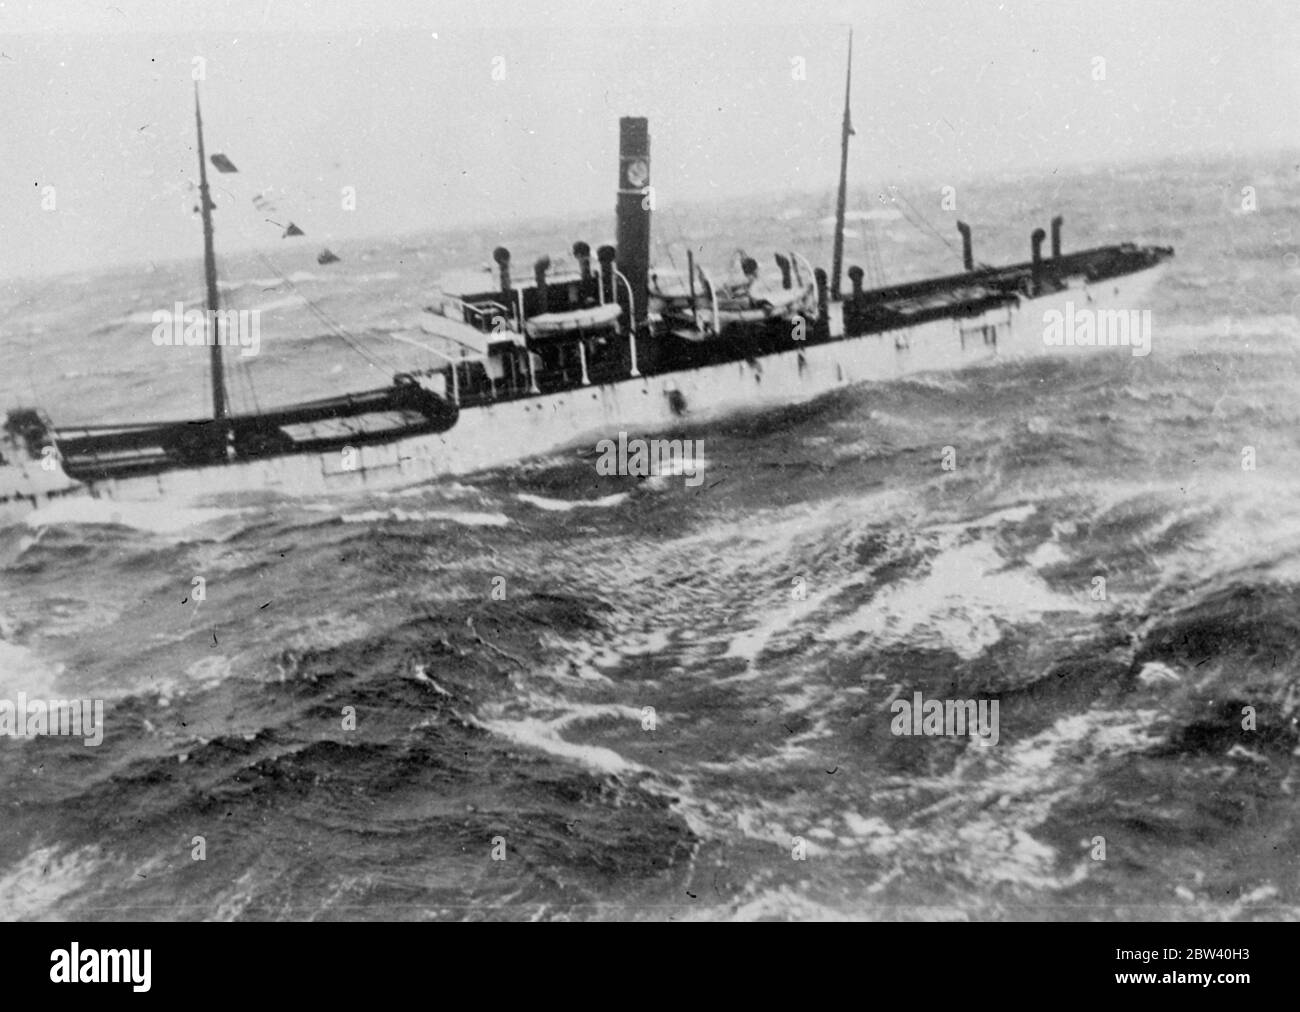 Norwegian ship sinks in Atlantic storm . The Norwegian cargo steamer Bjorkli foundered in a storm 500 miles off Nantucket Lightship . The crew of the sinking ship were taken of by the United States Coast Guard Cutter Chelan , which raced to the scene from Boston , Massachusetts . Photo shows , the Bjerkli about to settle down and sink in the heavy seas , picture taken from the rescue ship Chelan . 5 April 1937 Stock Photo